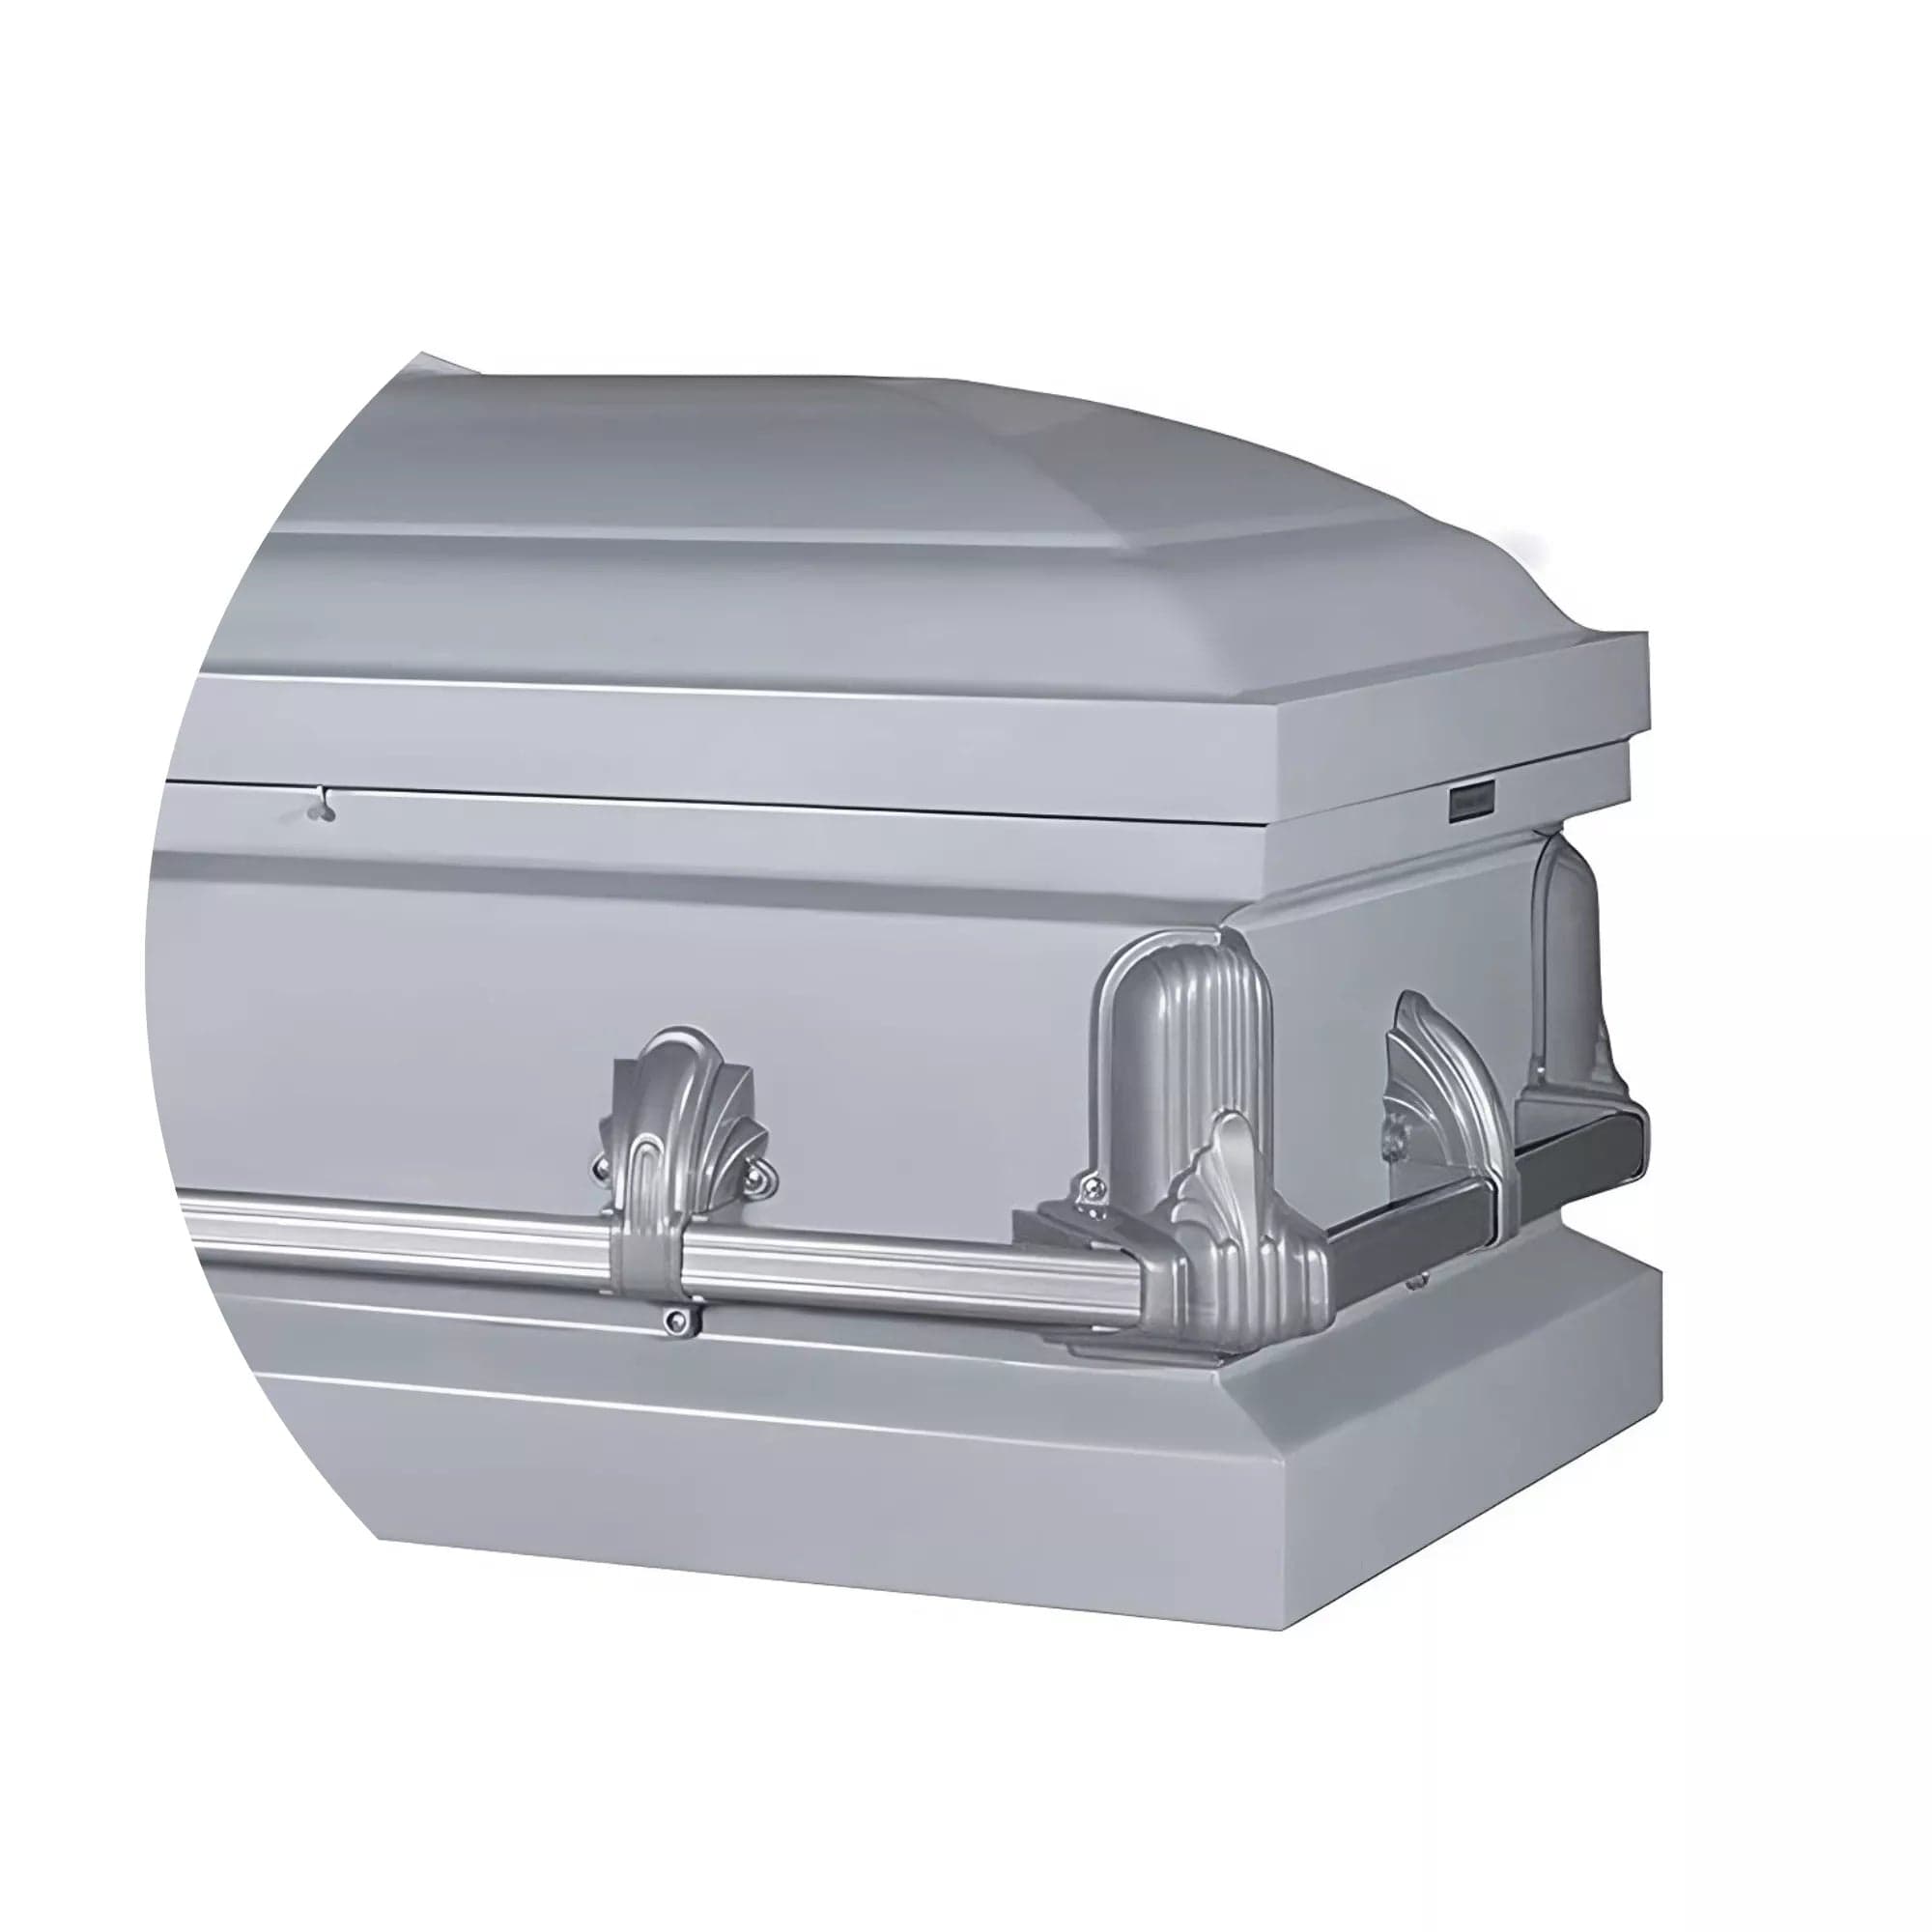 Andover Series | Silver Steel Casket with White Interior